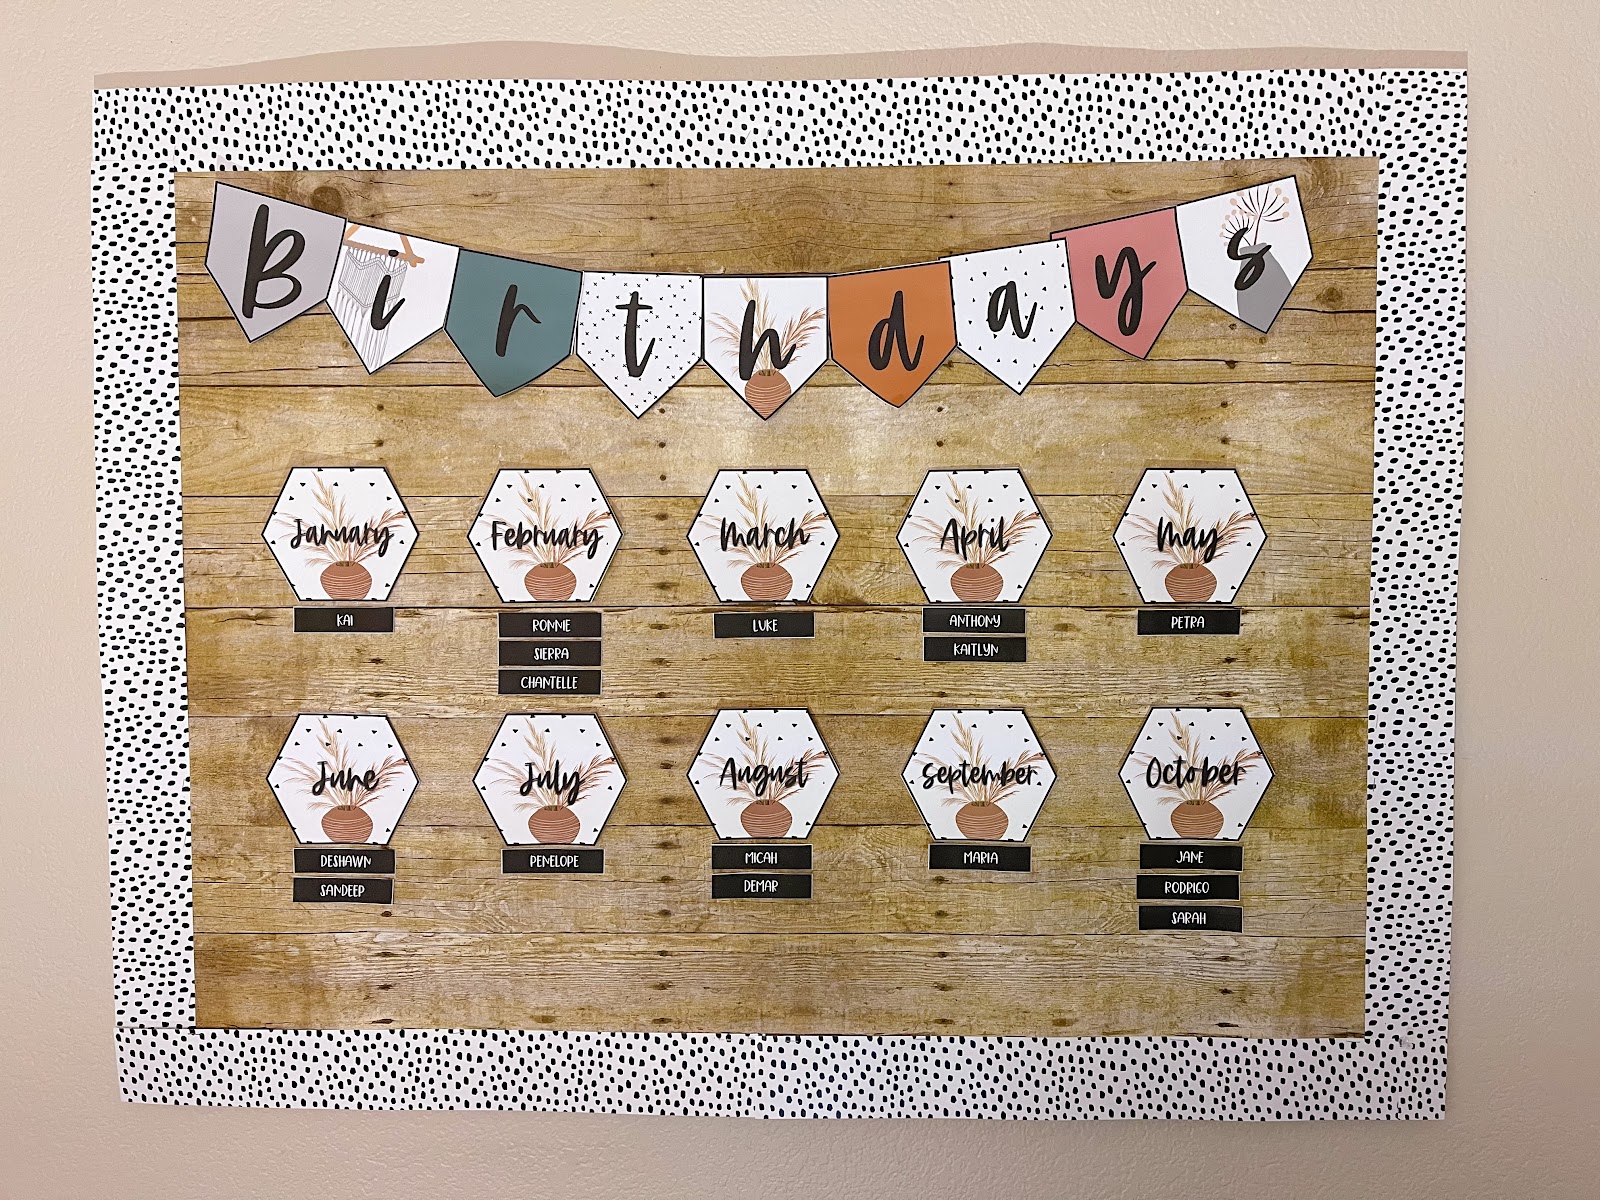 This image shows a bulletin board display with a heading reading "Birthdays". There is a card for each month of the year with smaller cards for student names underneath. The month cards are decorated with a neutral colored potted plant. 